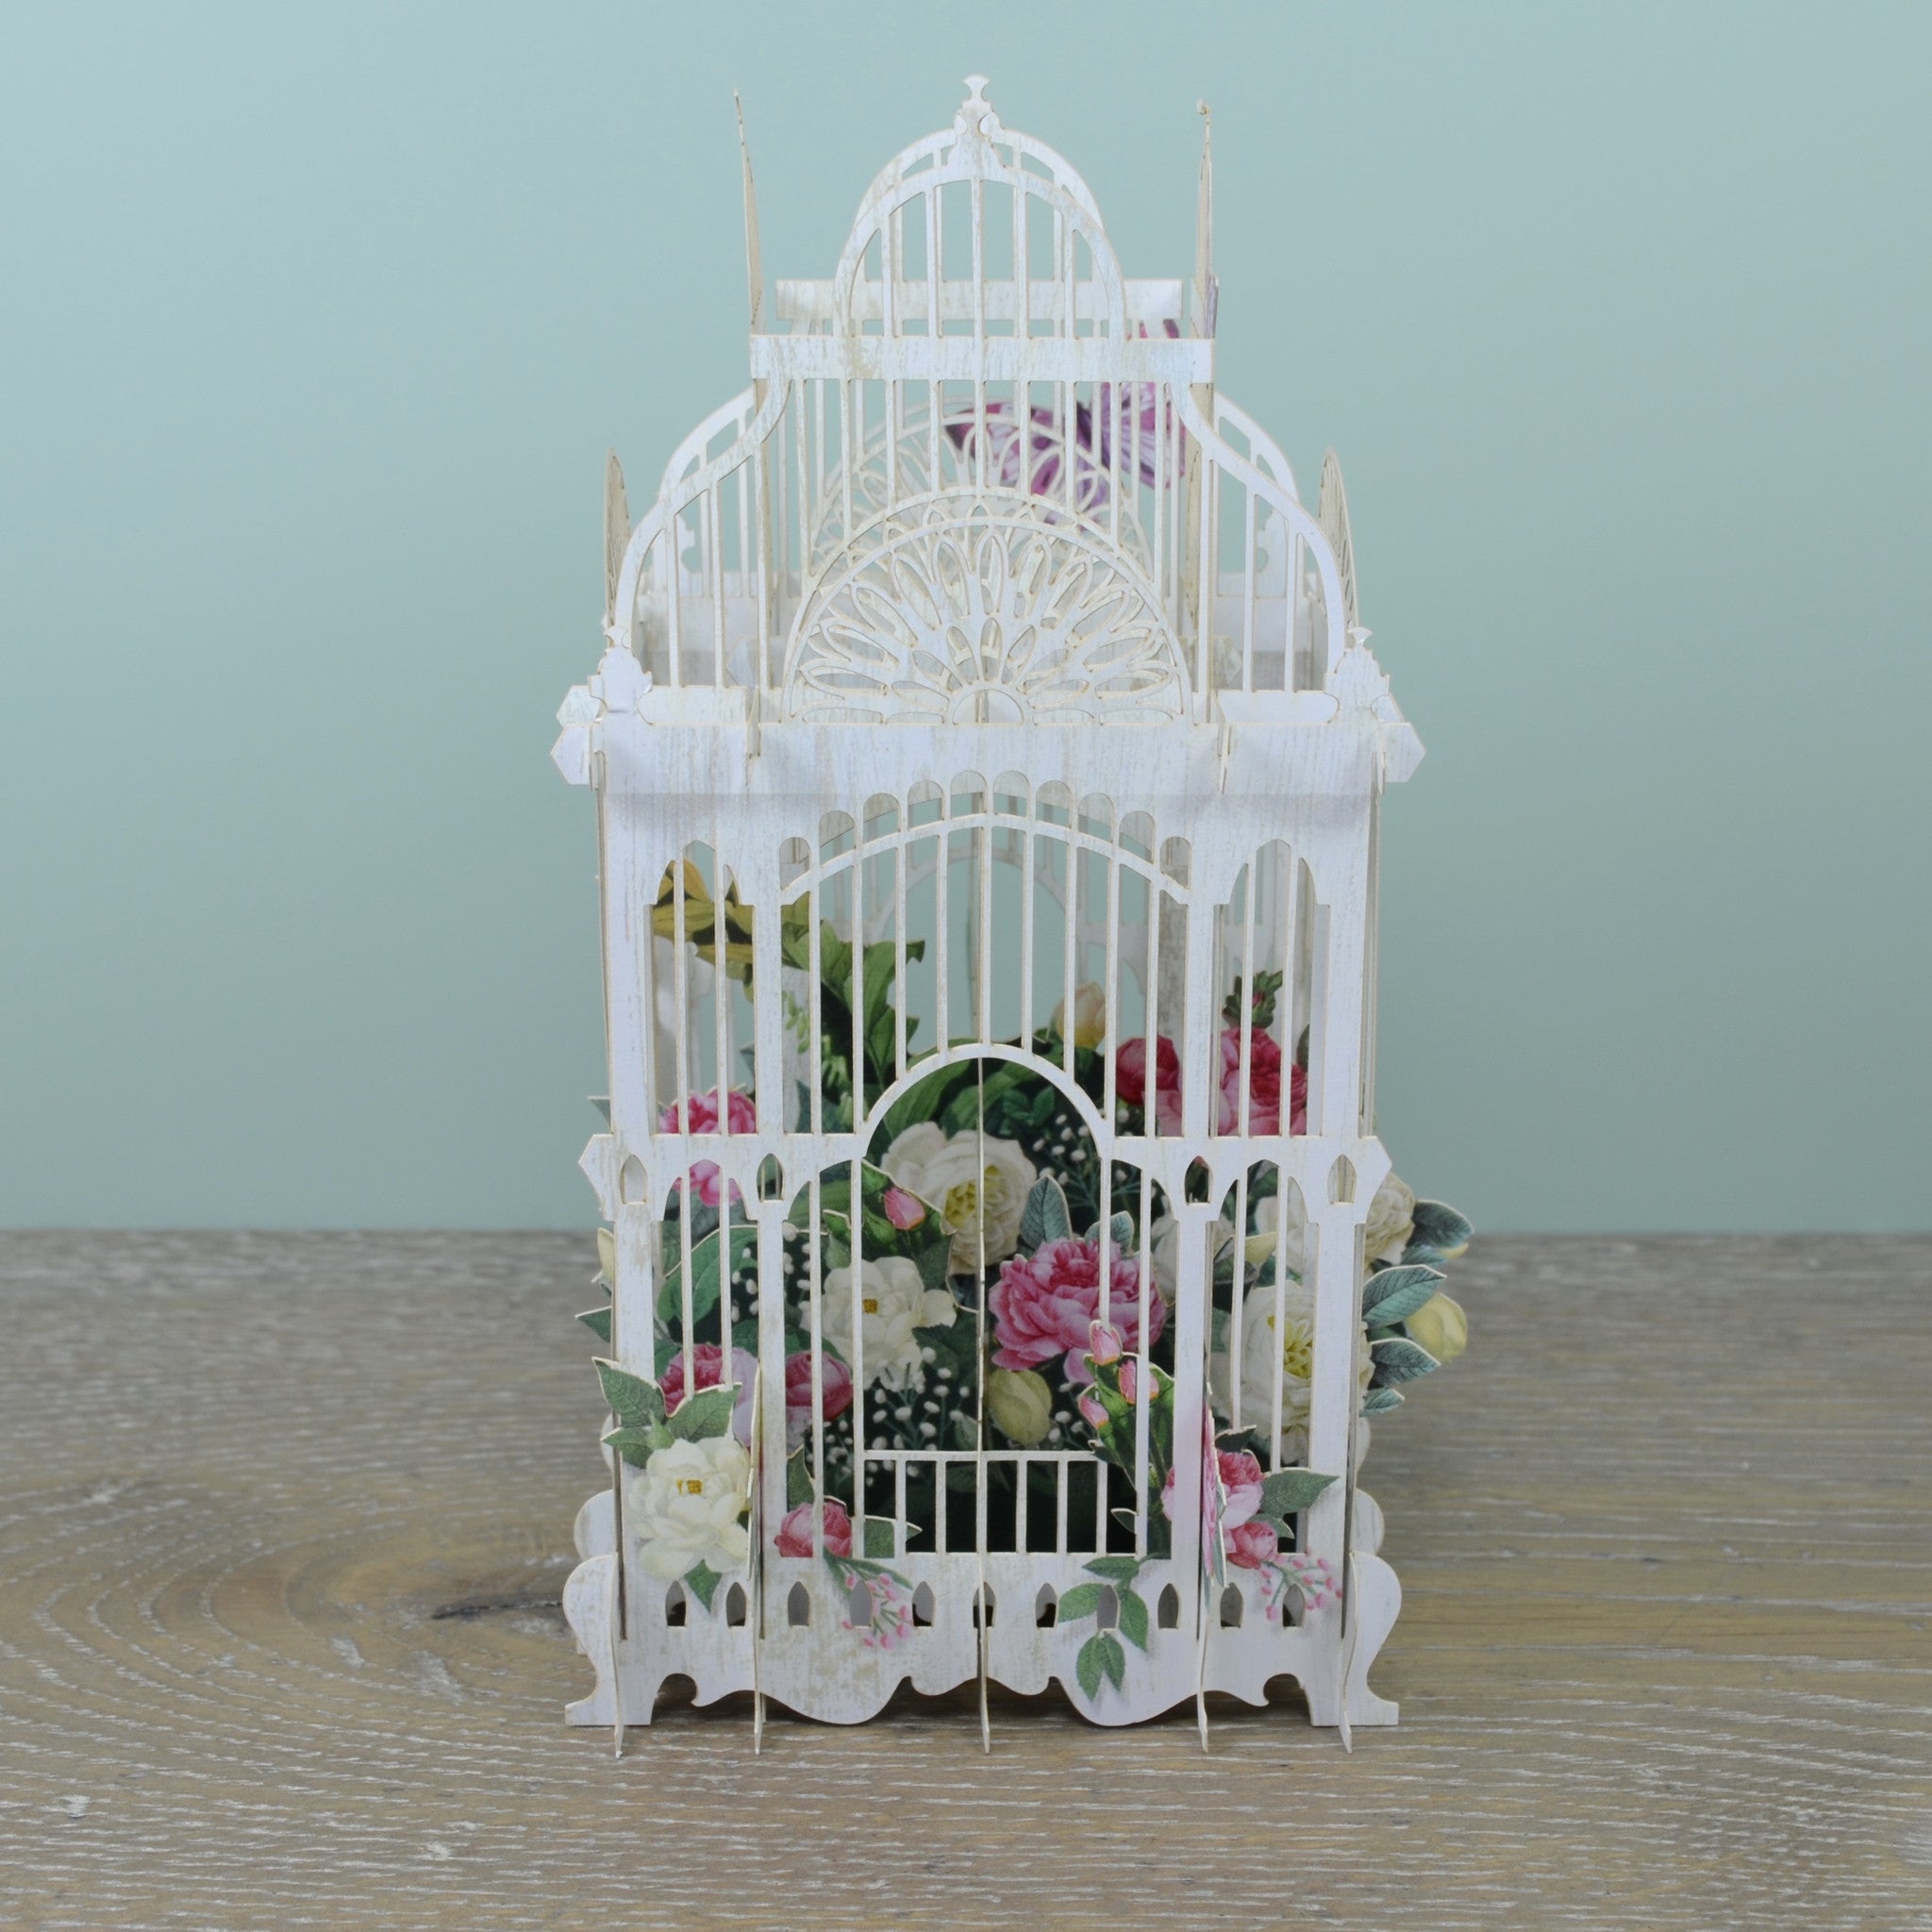 &quot;75 Today Flower Cage&quot; - 3D Pop Up Greetings Card